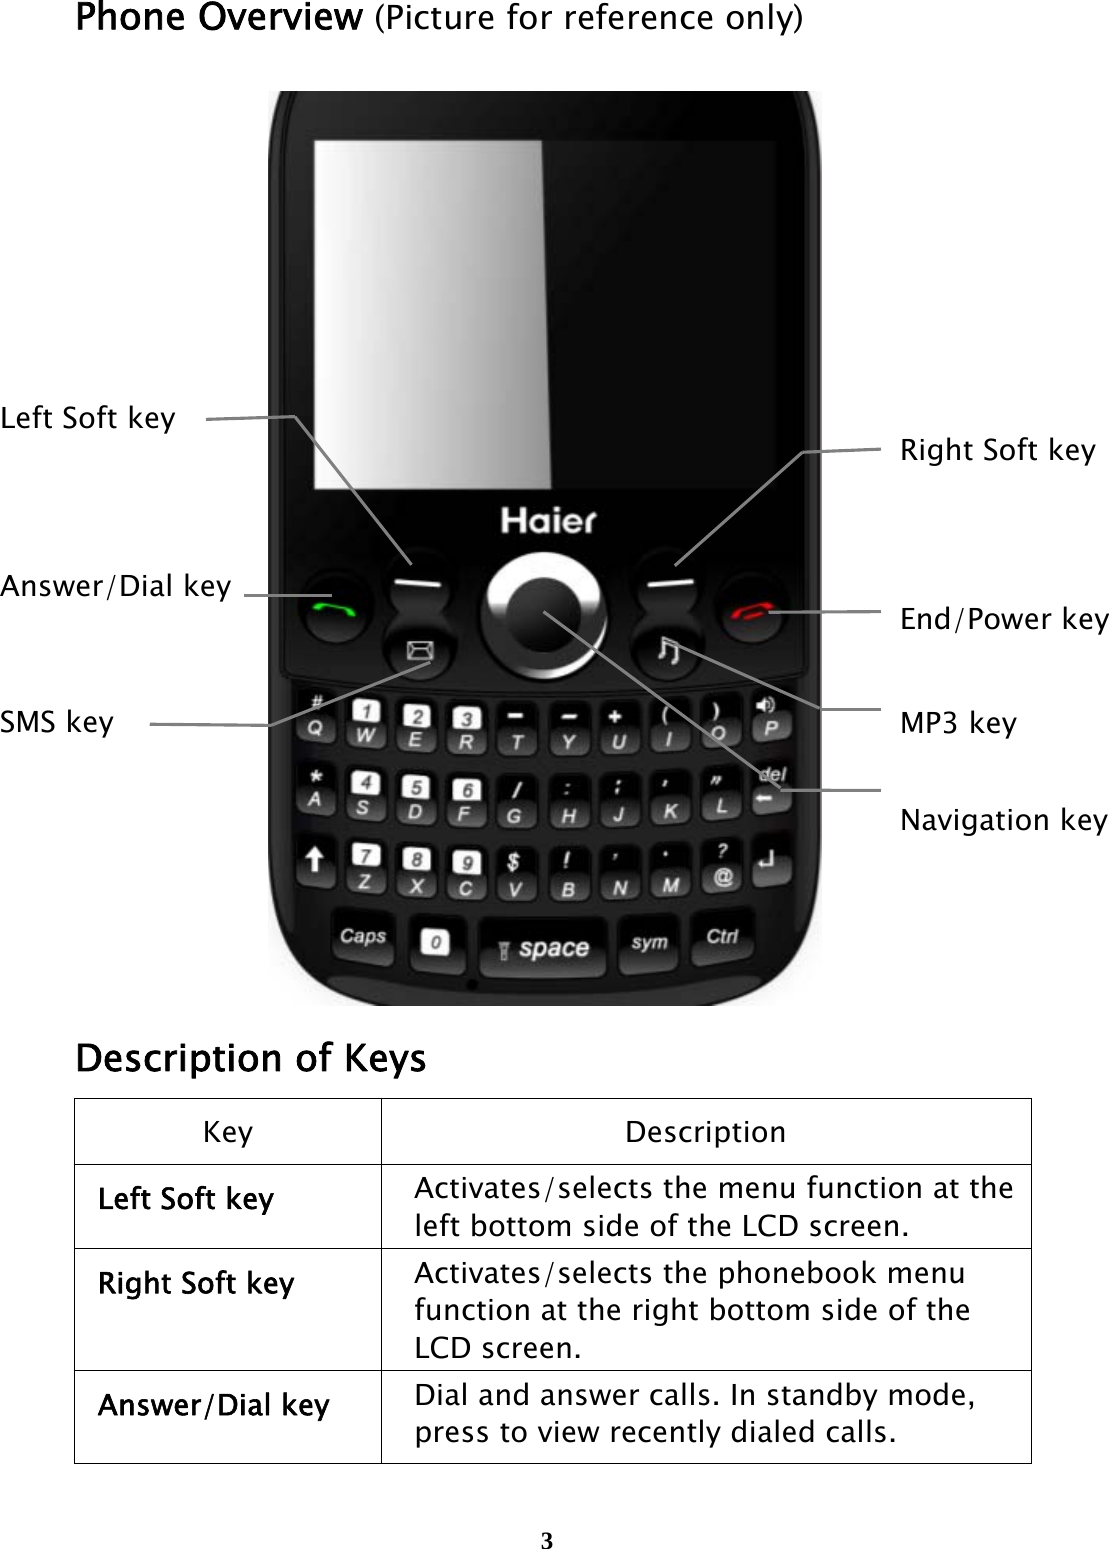  3Phone Overview (Picture for reference only)  Description of Keys Key Description Left Soft key  Activates/selects the menu function at the left bottom side of the LCD screen. Right Soft key Activates/selects the phonebook menu function at the right bottom side of the LCD screen. Answer/Dial key Dial and answer calls. In standby mode, press to view recently dialed calls. Left Soft key    Answer/Dial key   SMS key Right Soft key   End/Power key MP3 key  Navigation key